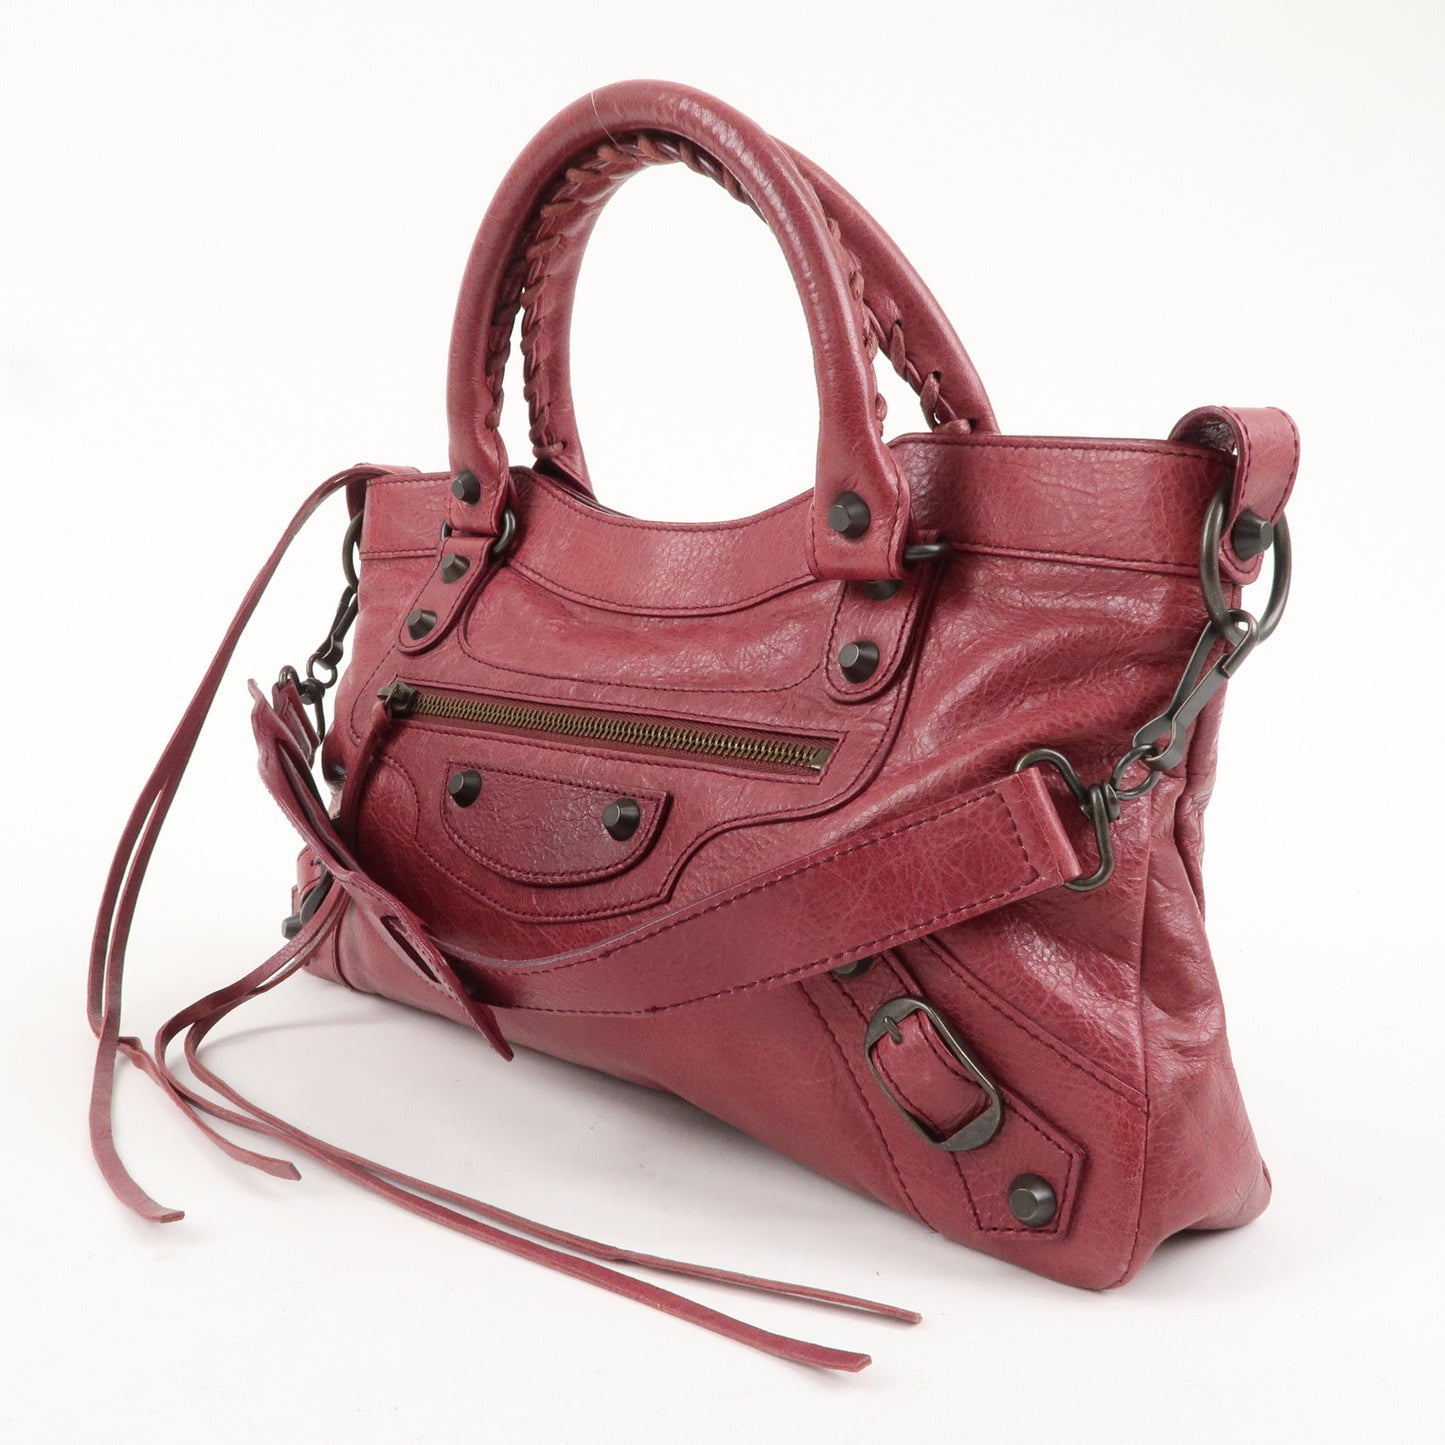 BALENCIAGA The First Leather 2Way Bag Hand Bag Wine Red 103208